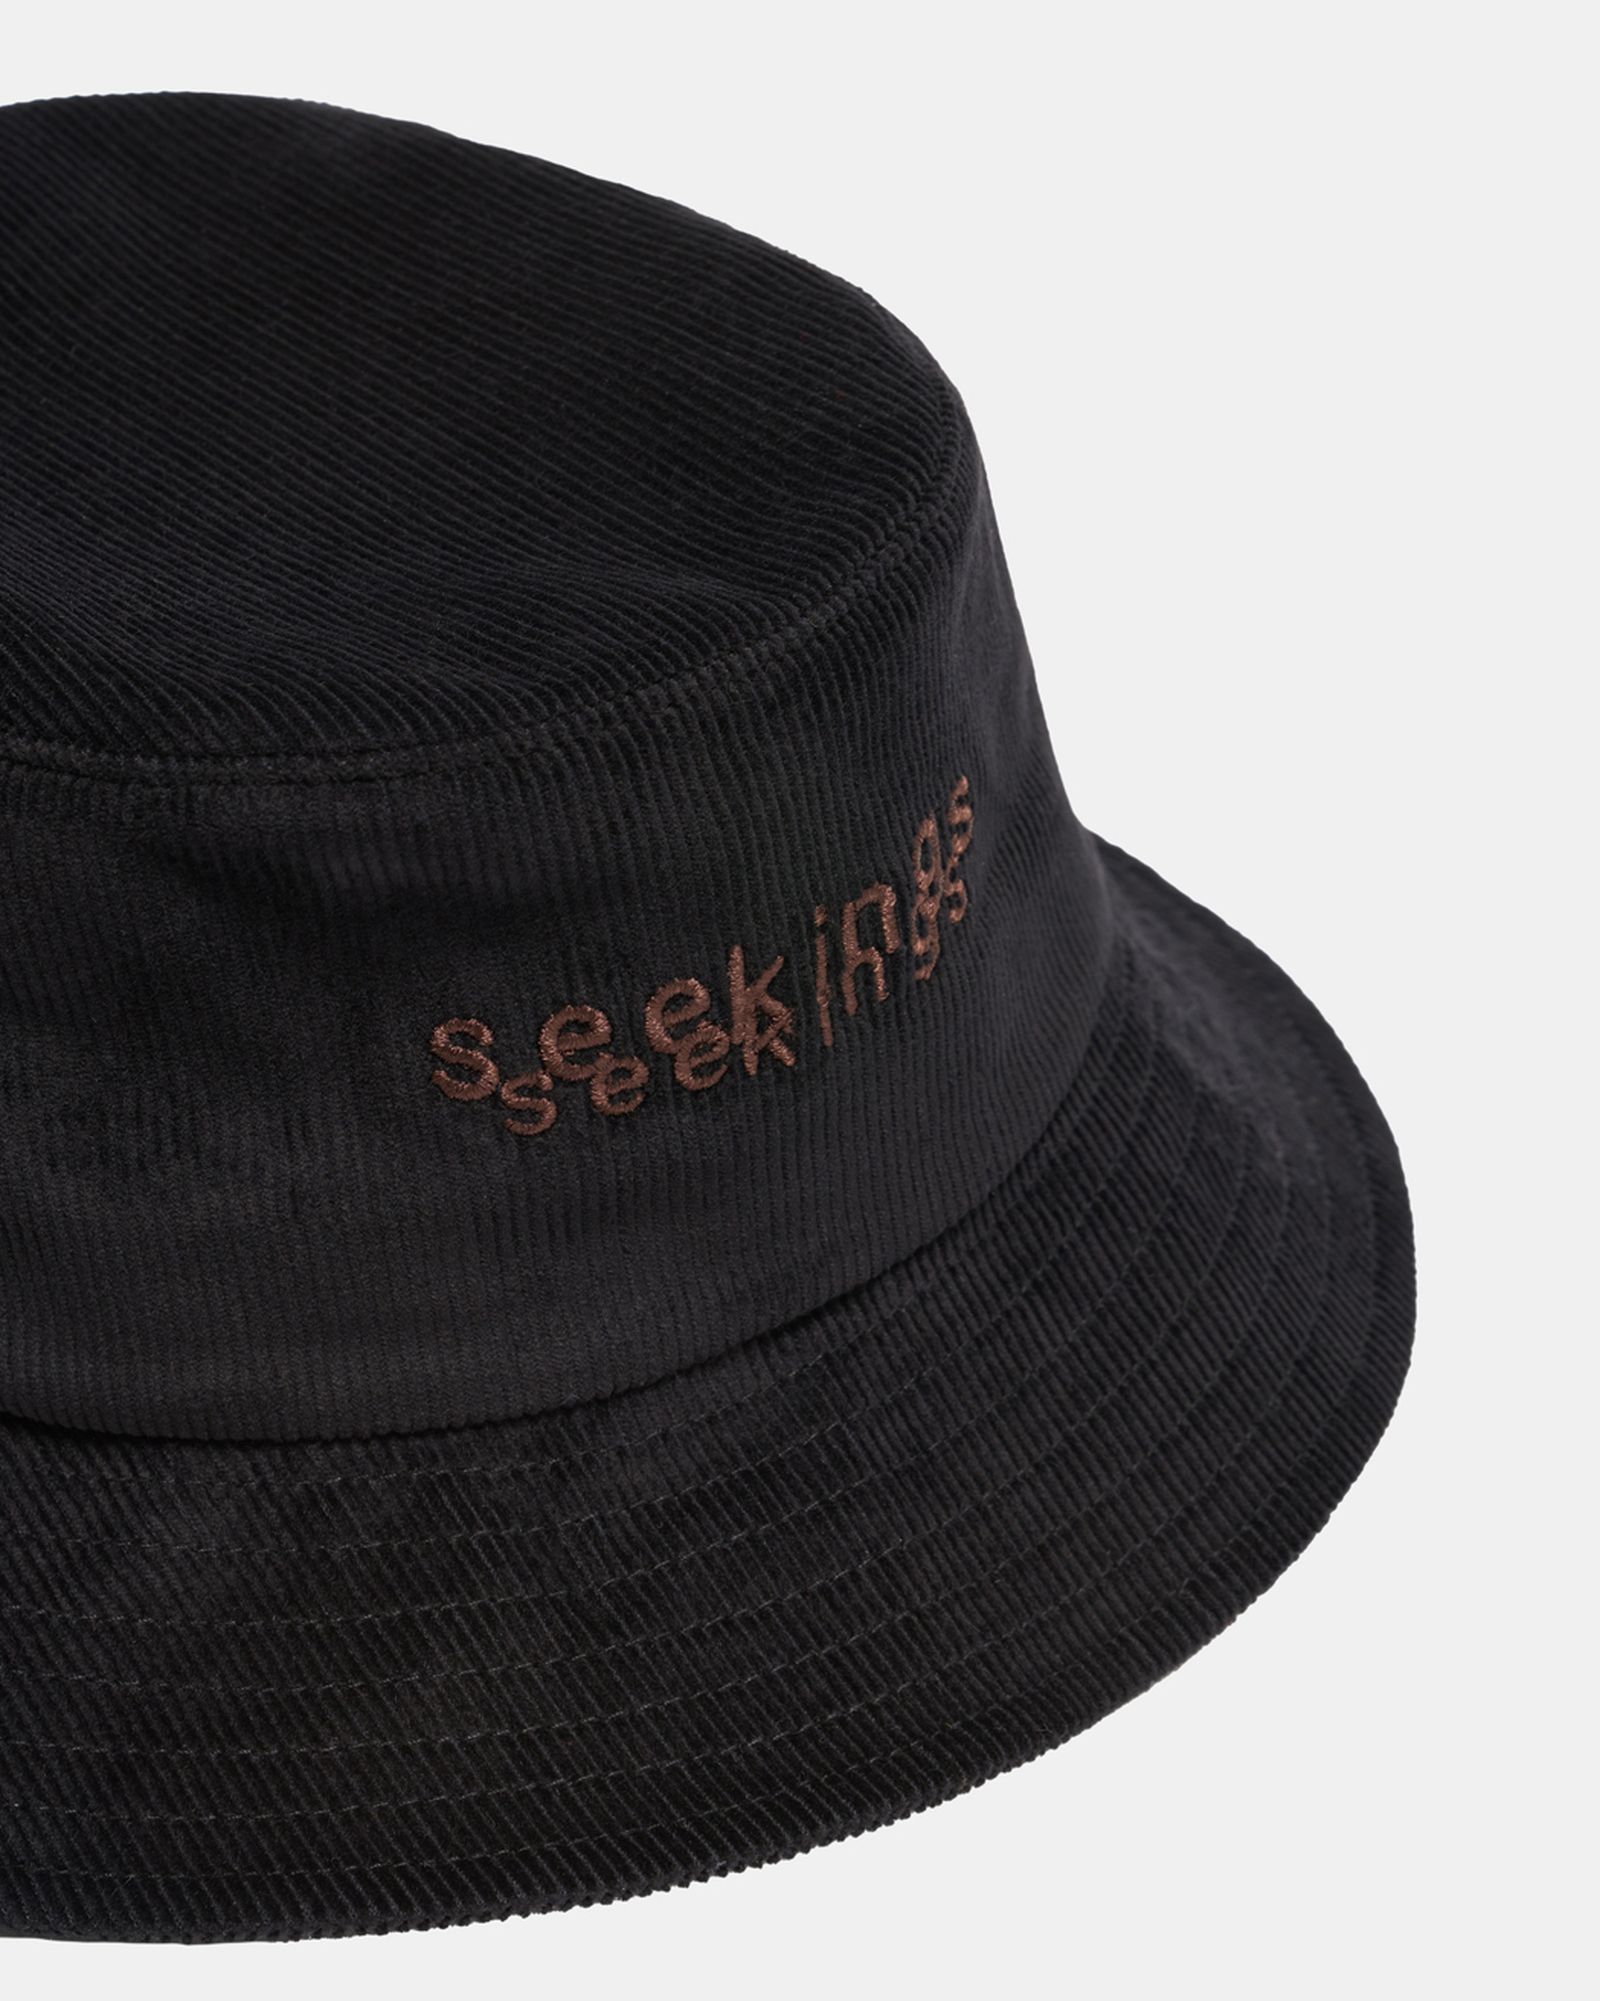 seekings-clothing-second-collection-release-price (3)